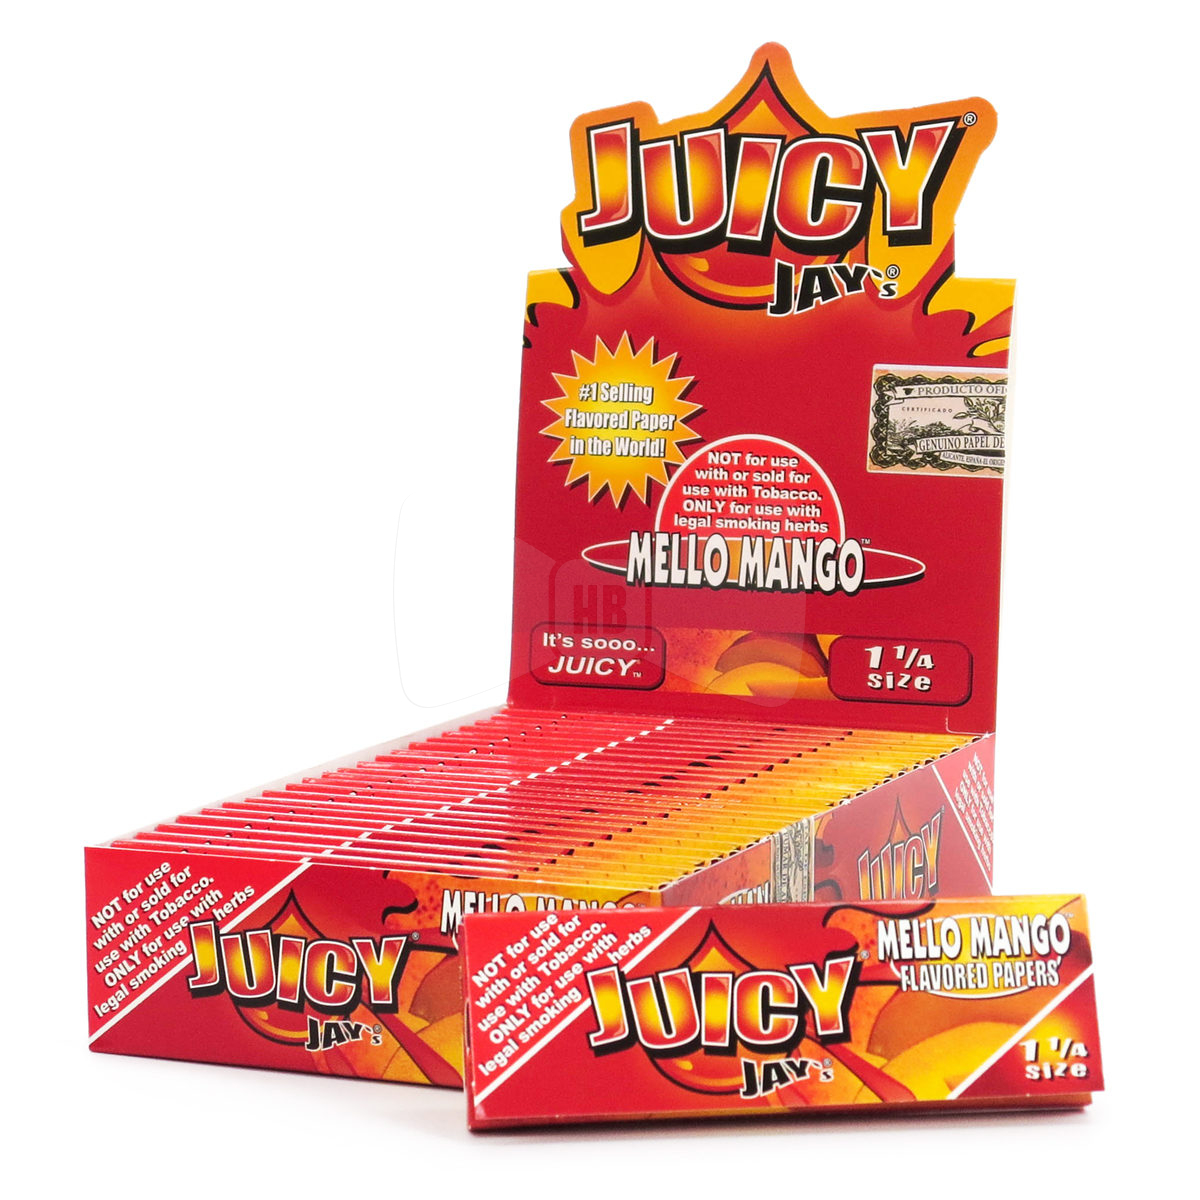 Juicy Jays Mello Mango Rolling Papers 1 Pack King Size